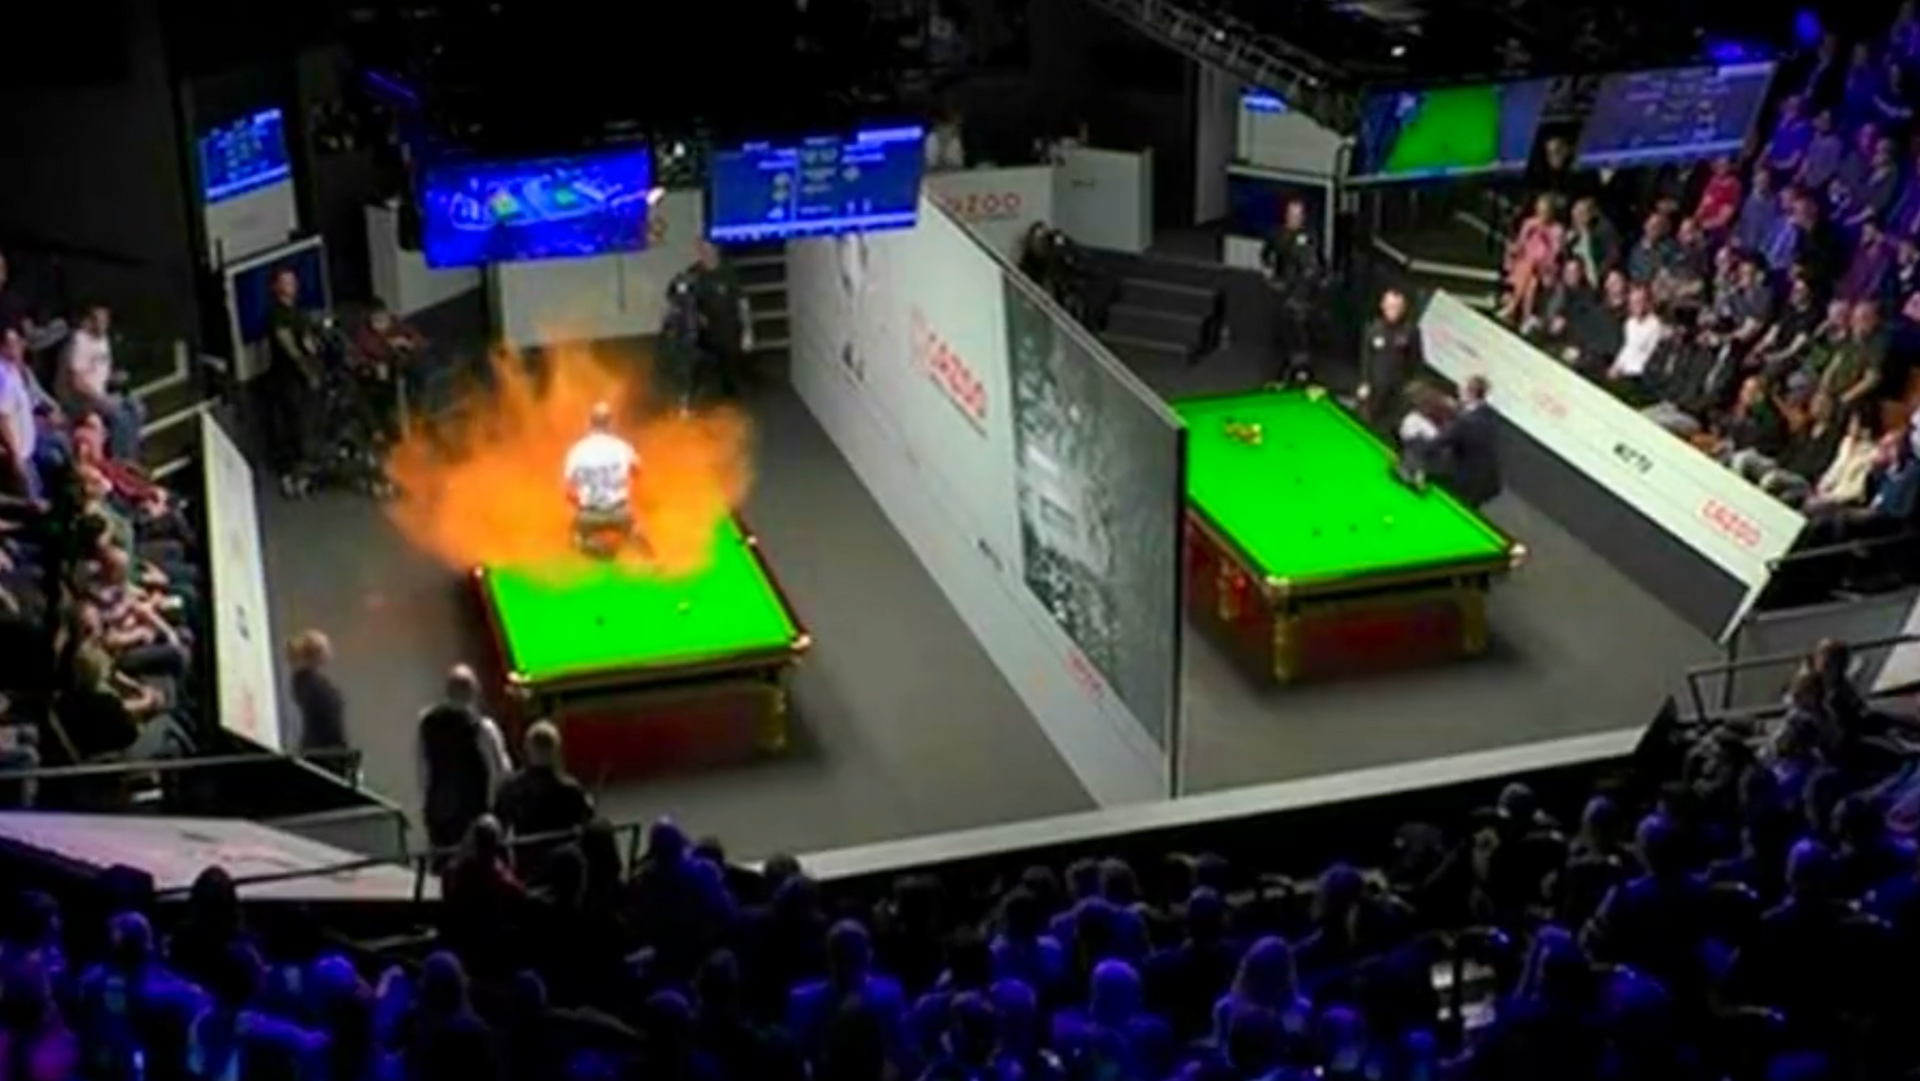 Image captures moment in which two Just Stop Oil activists storm two tables at the World Snooker Championship in Sheffield, UK. - Sputnik International, 1920, 18.04.2023